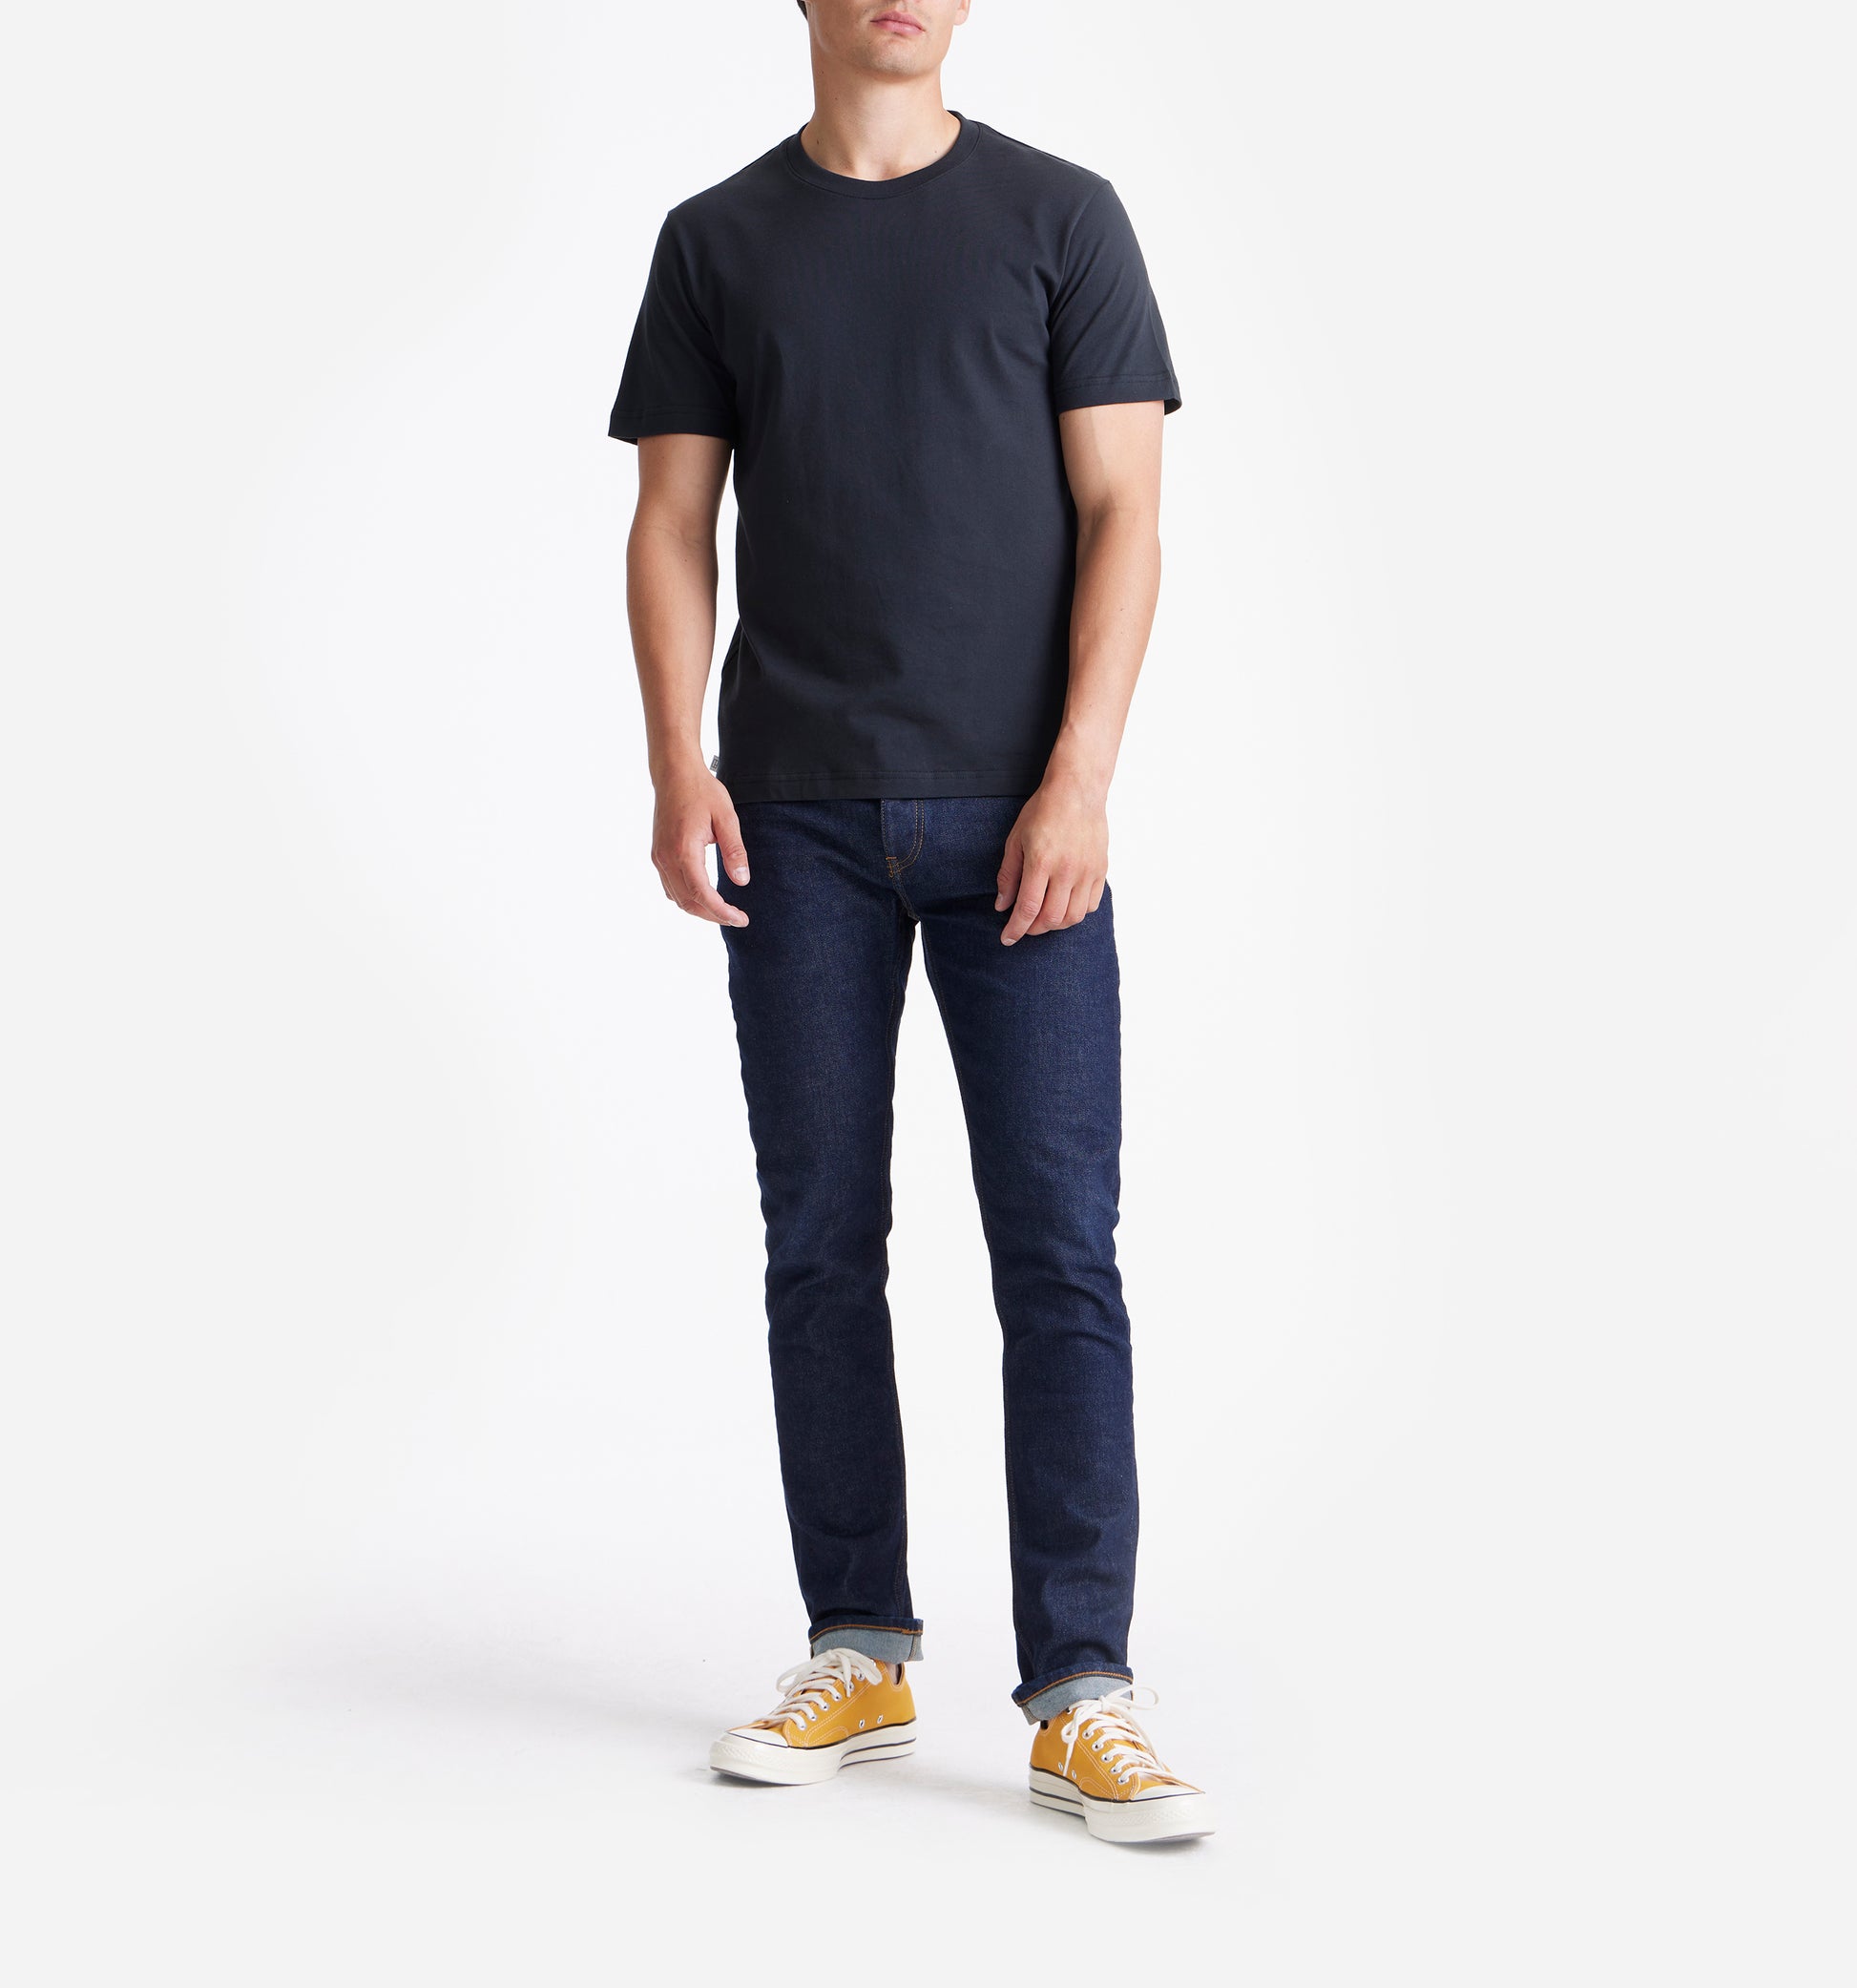 The Steve - Basic Cotton T-shirt In Black From King Essentials